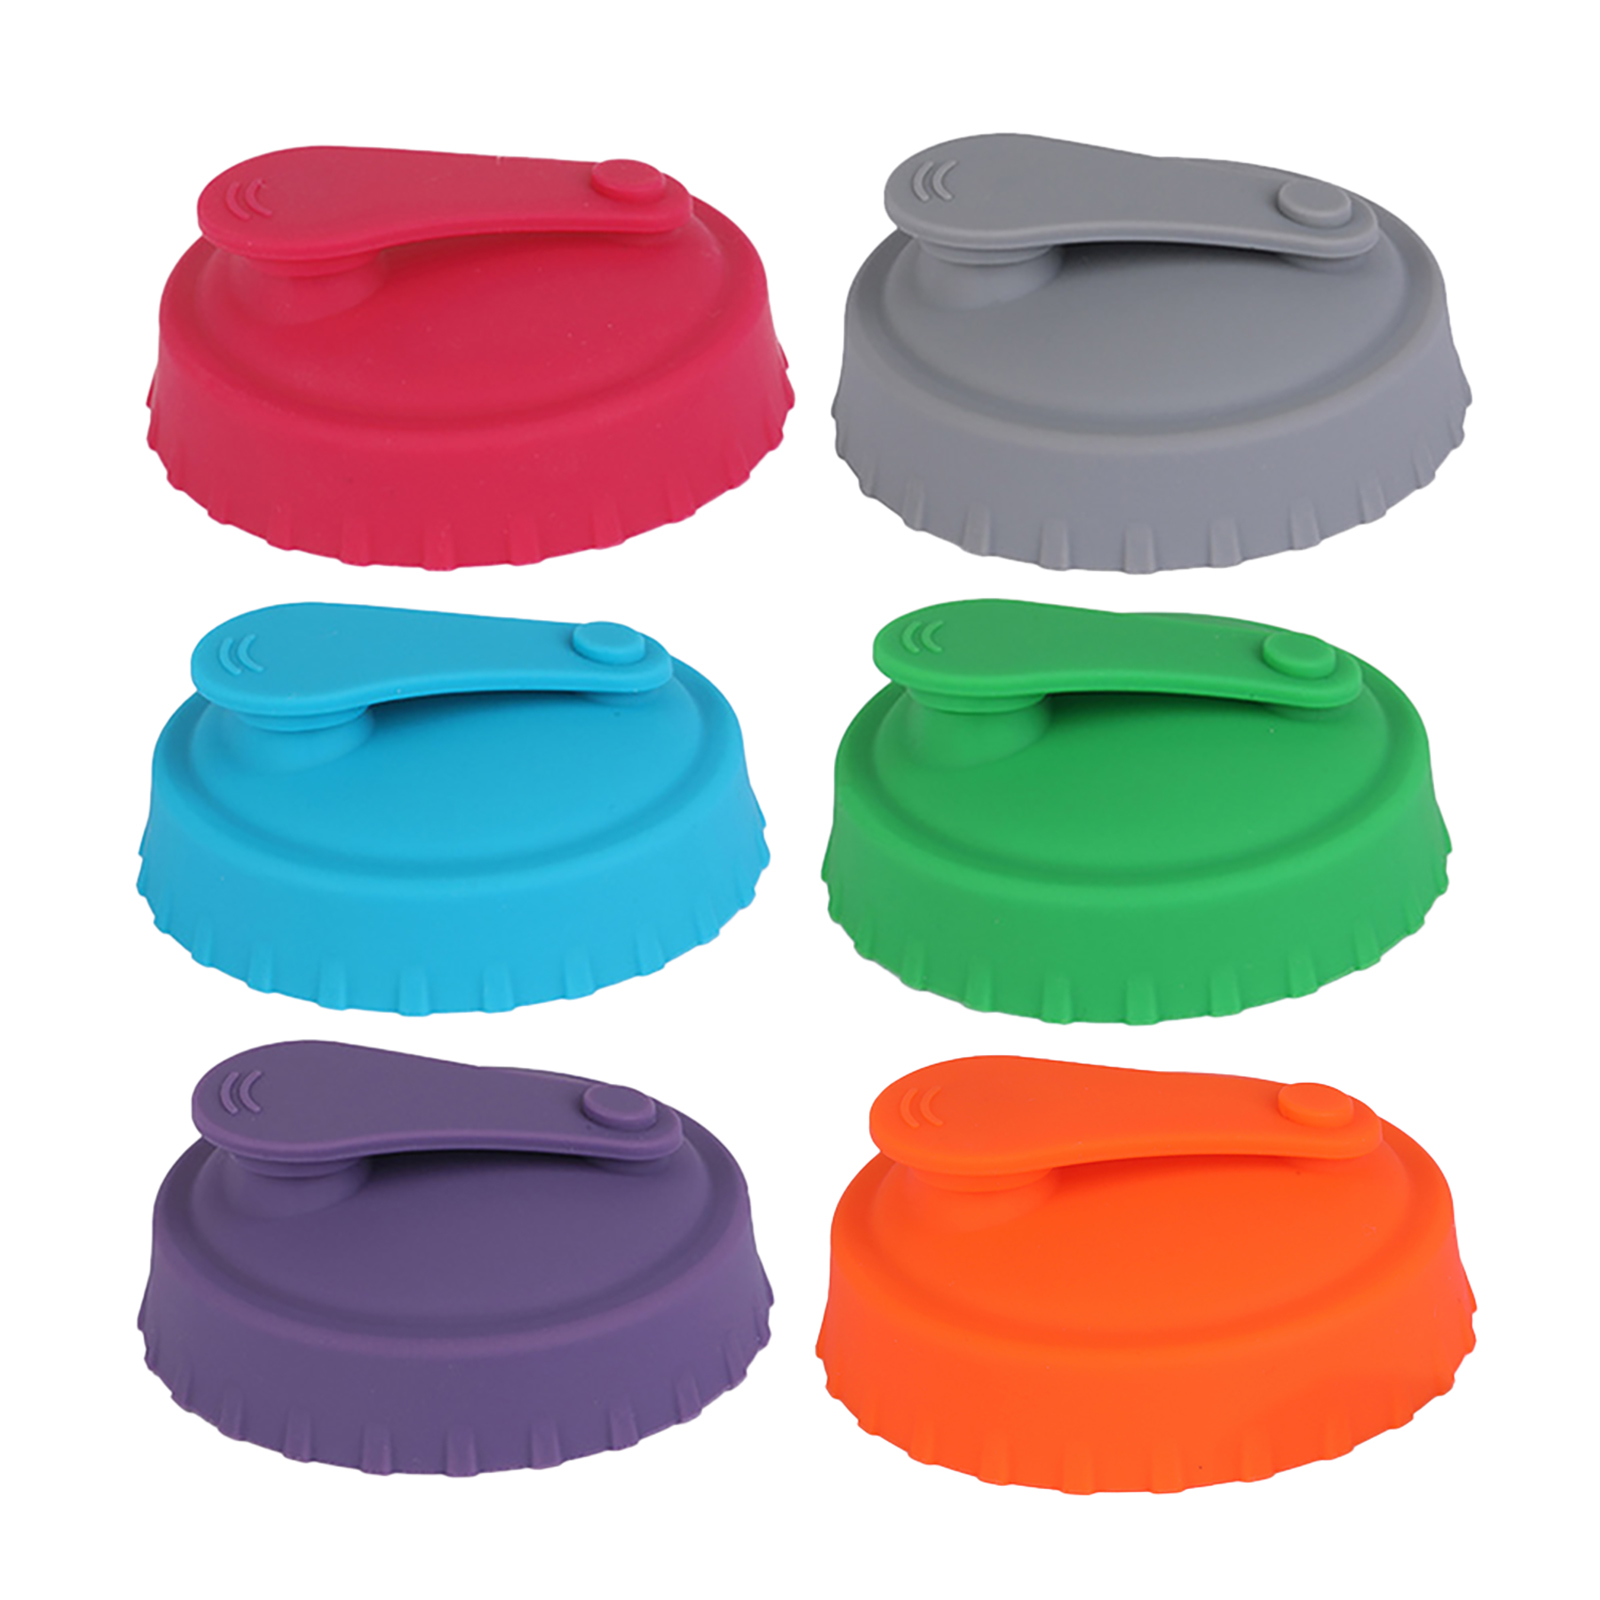 Silicone Can Cover 6 Pack Reusable Leak-proof Dishwasher Safe Silicone Can Lids For Outdoor Picnics Travel 6-piece set